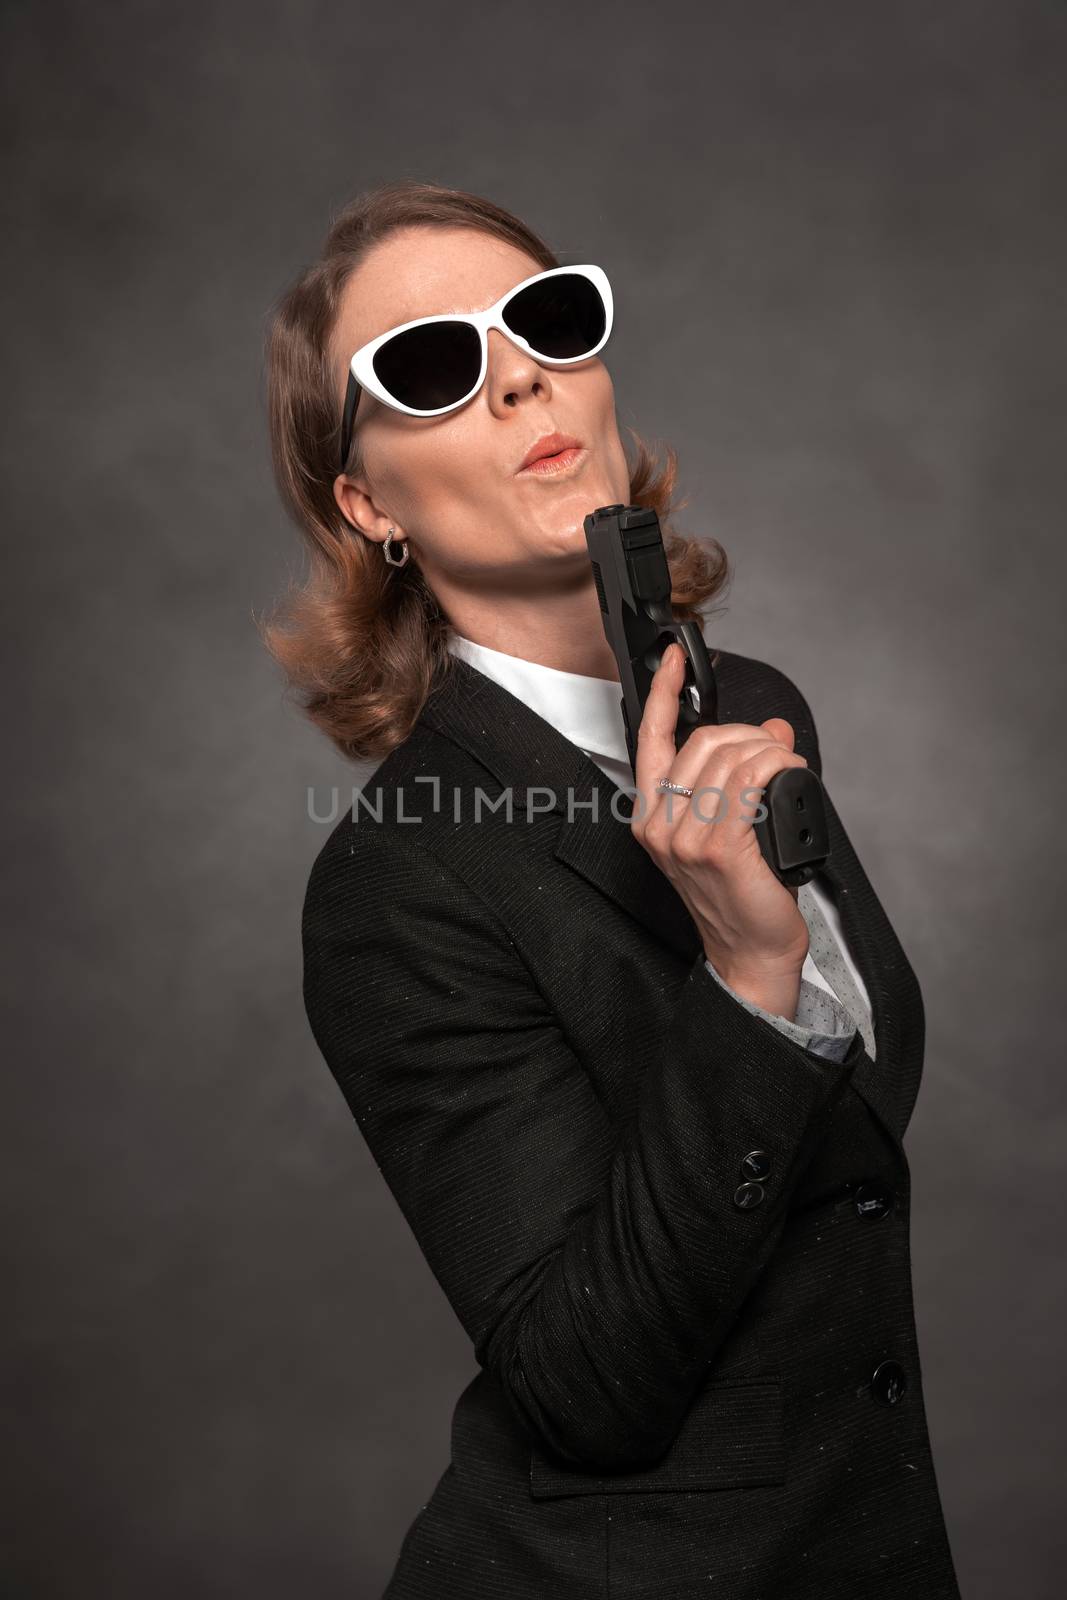 criminal policewoman in civilian clothes with a gun in her hand. portrait with dark background by Edophoto